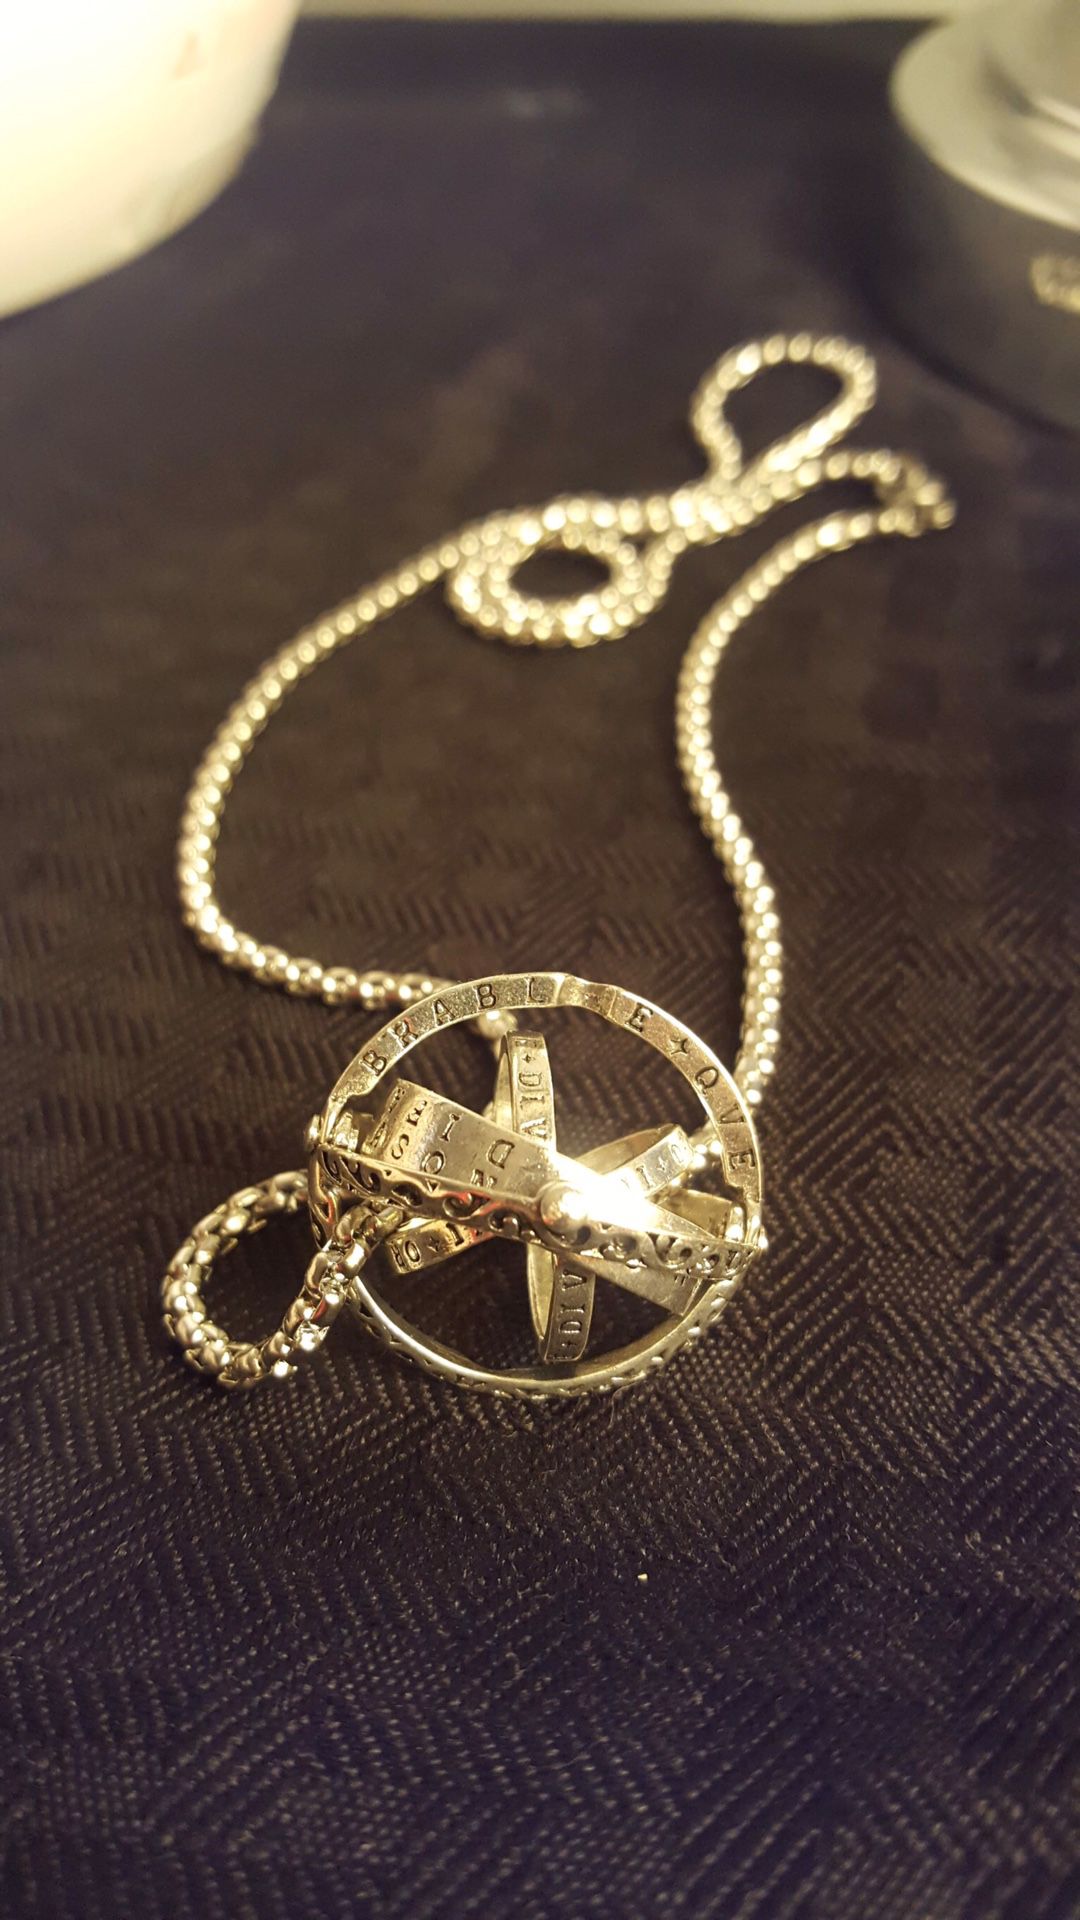 Very cool handmade 925 ring / pendant necklace ❤️❤️❤️ shipping only✈️✈️✈️✈️